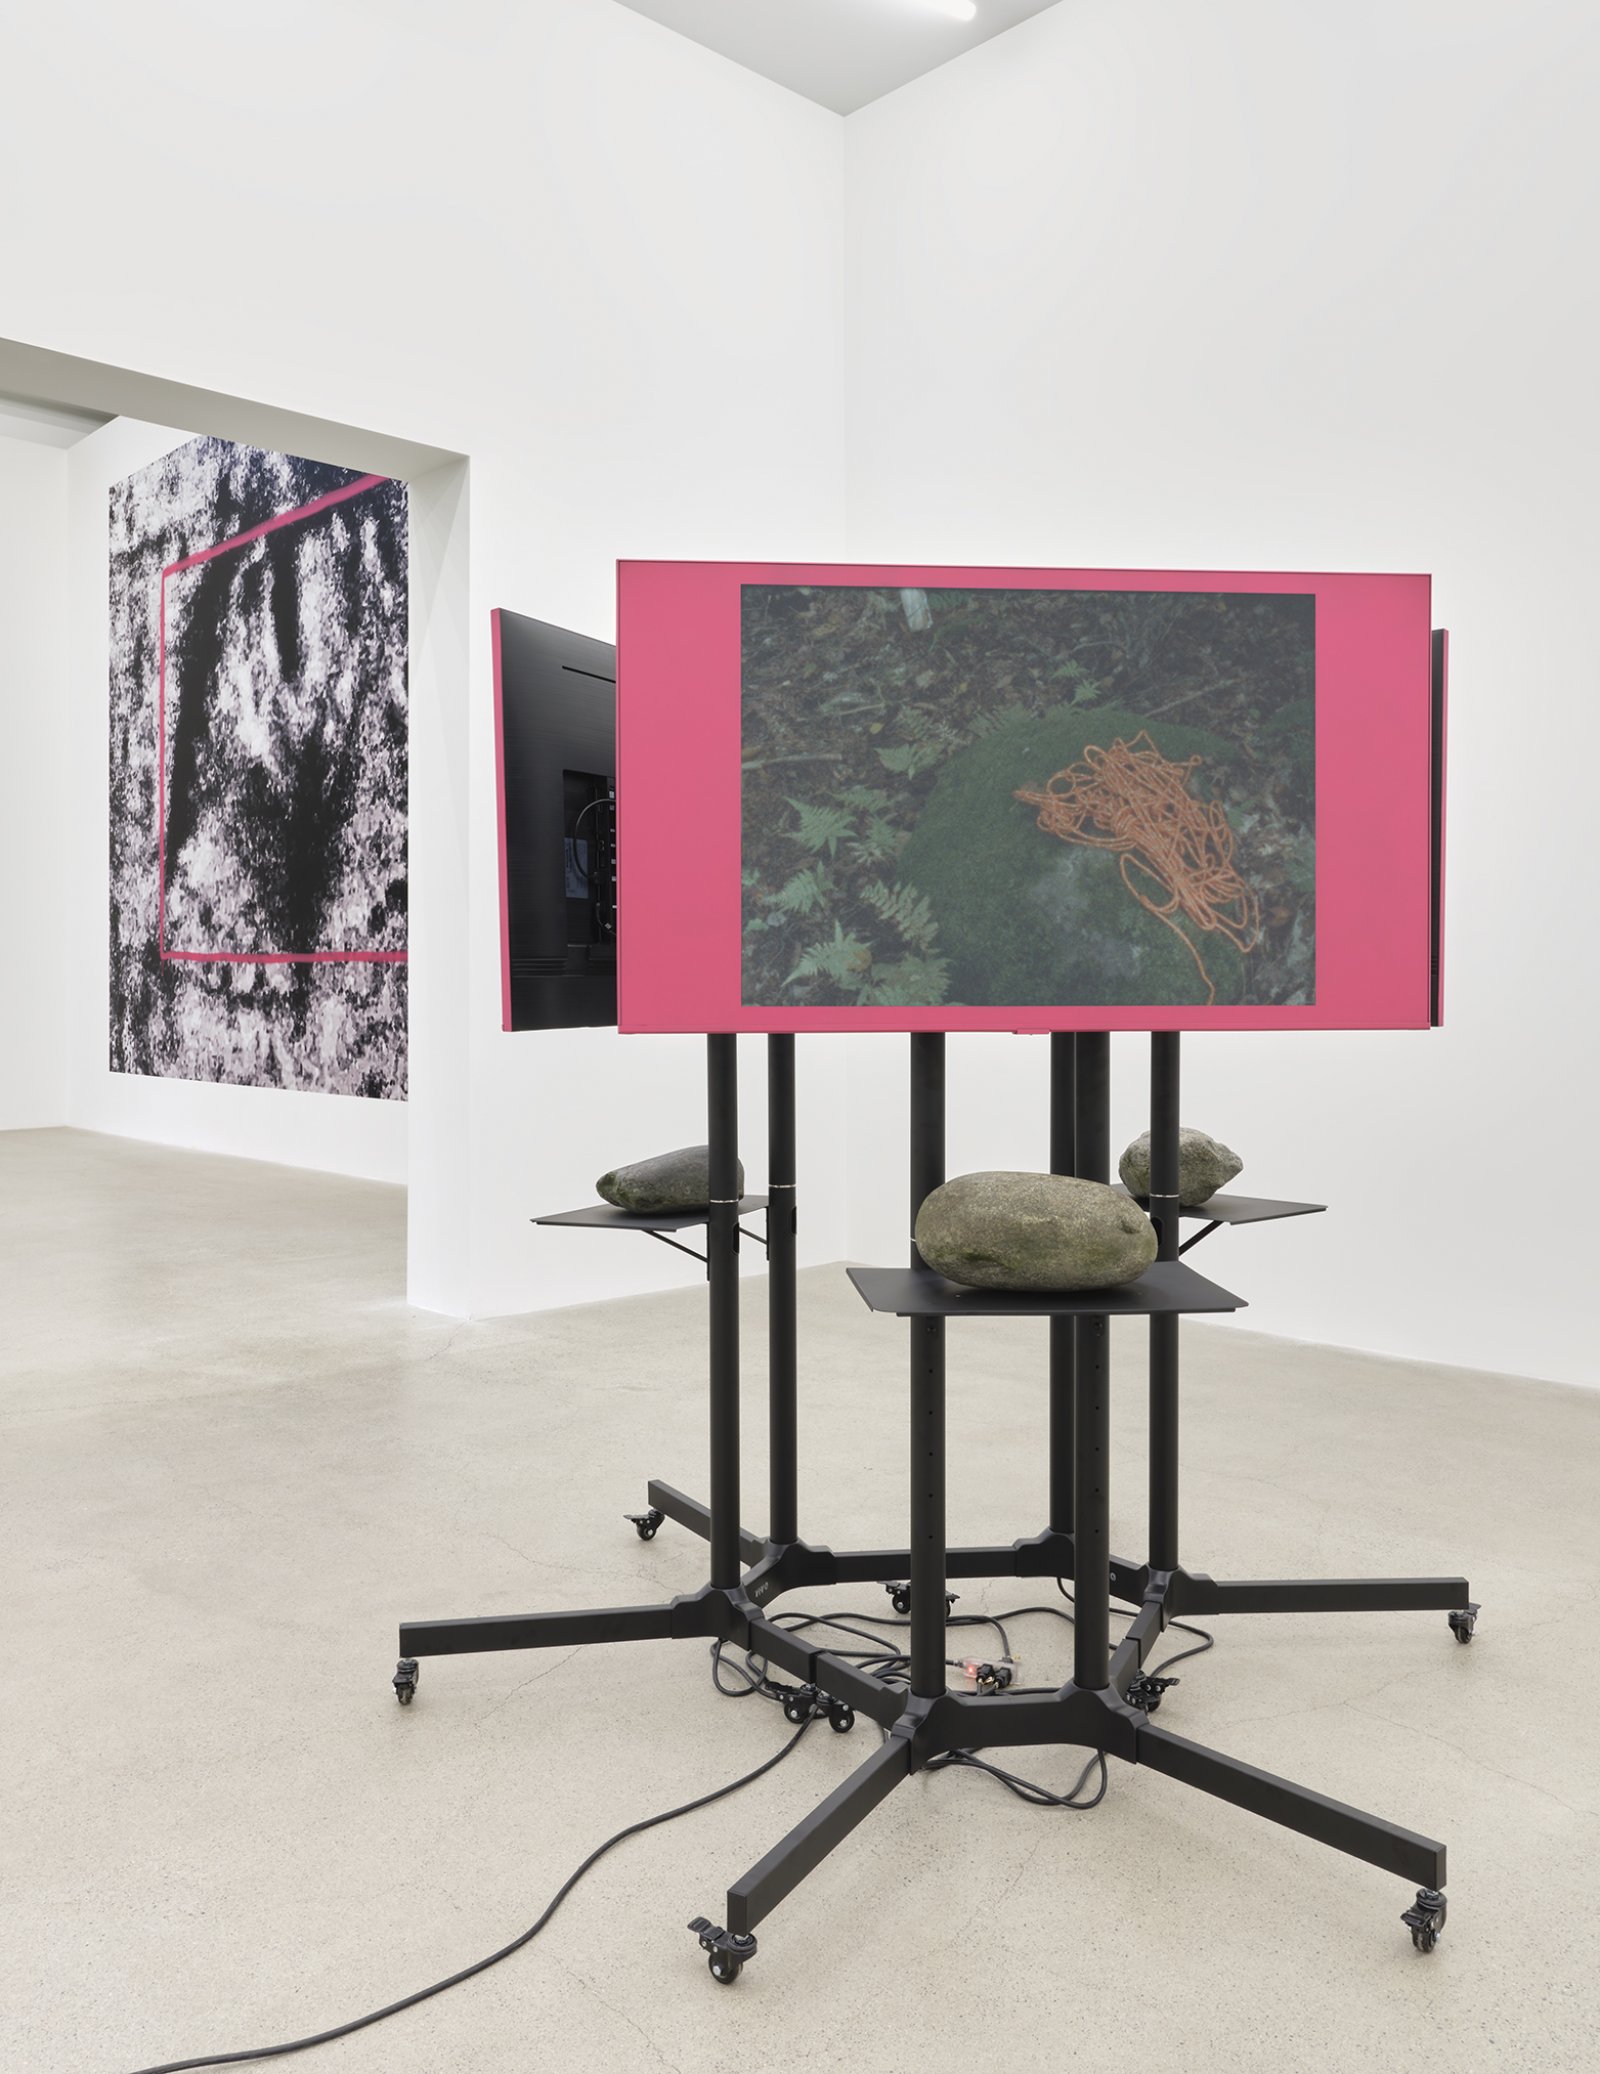 Duane Linklater, primaryuse, 2020, mixed media, dimensions variable by Duane Linklater